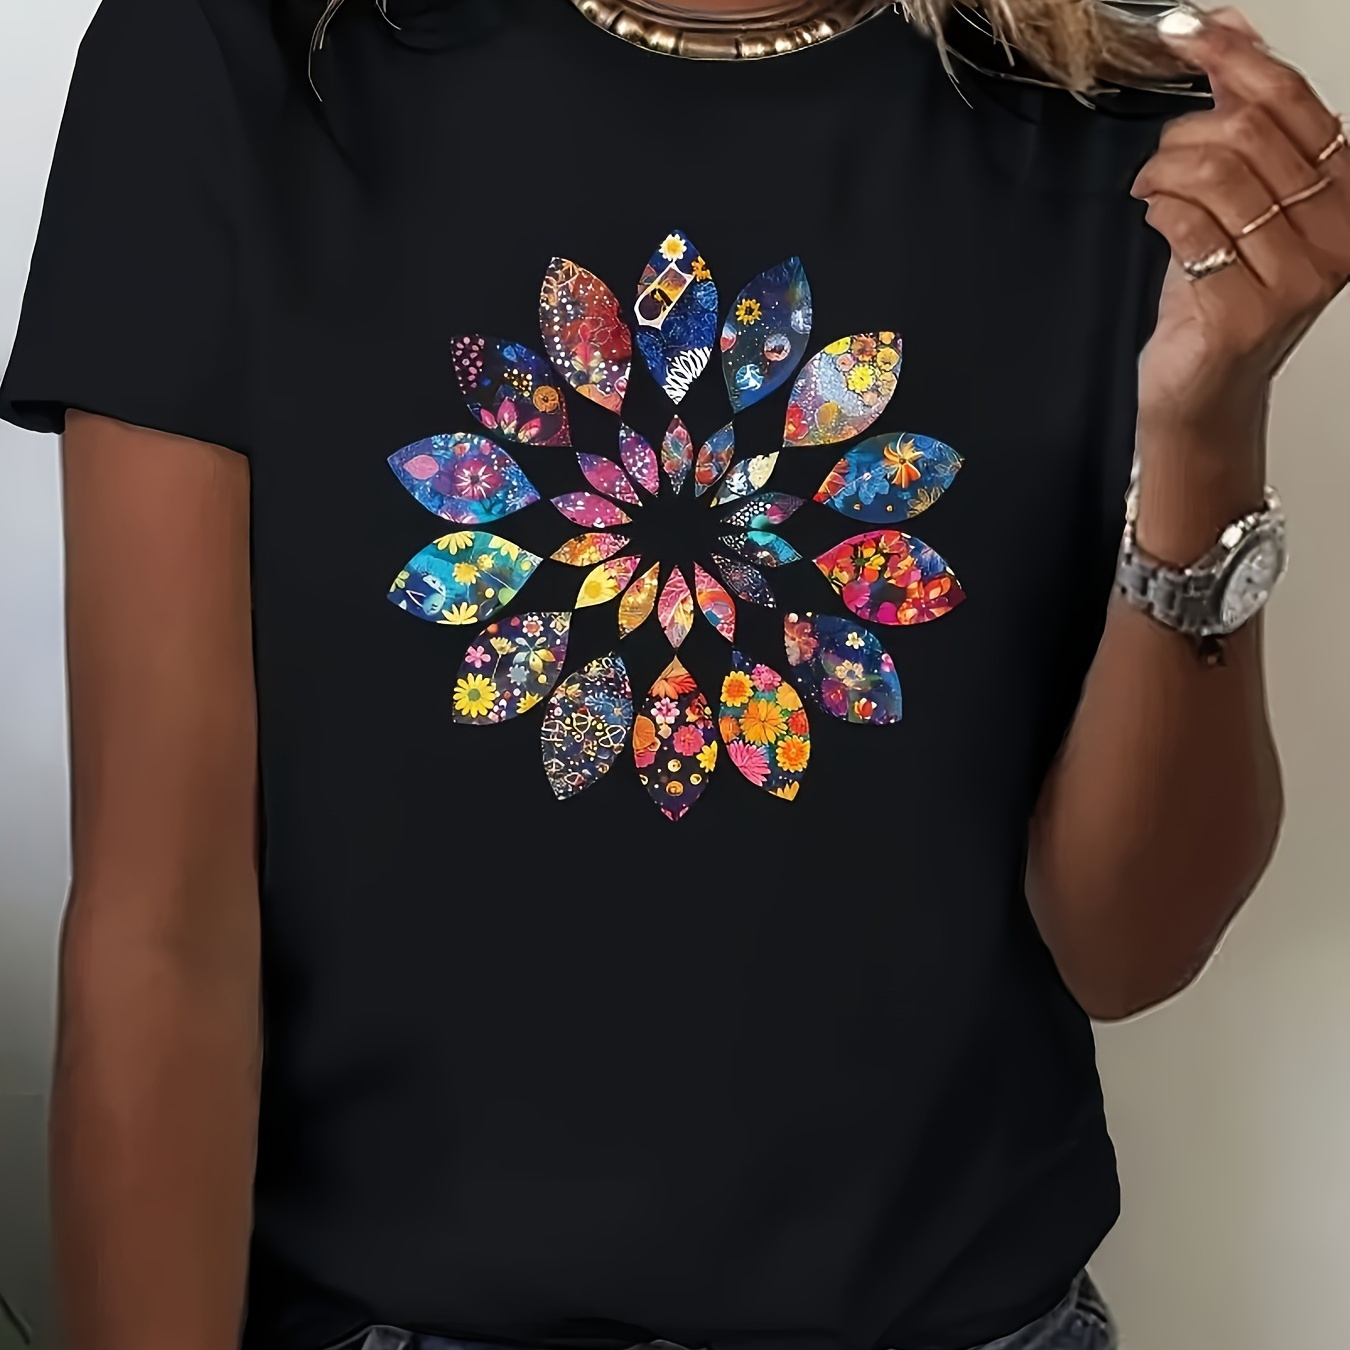 

Hippie Floral Vibrance Casual Women T-shirt Comfort Fit Graphic Tees Cotton Tees Casual Short Sleeve Top